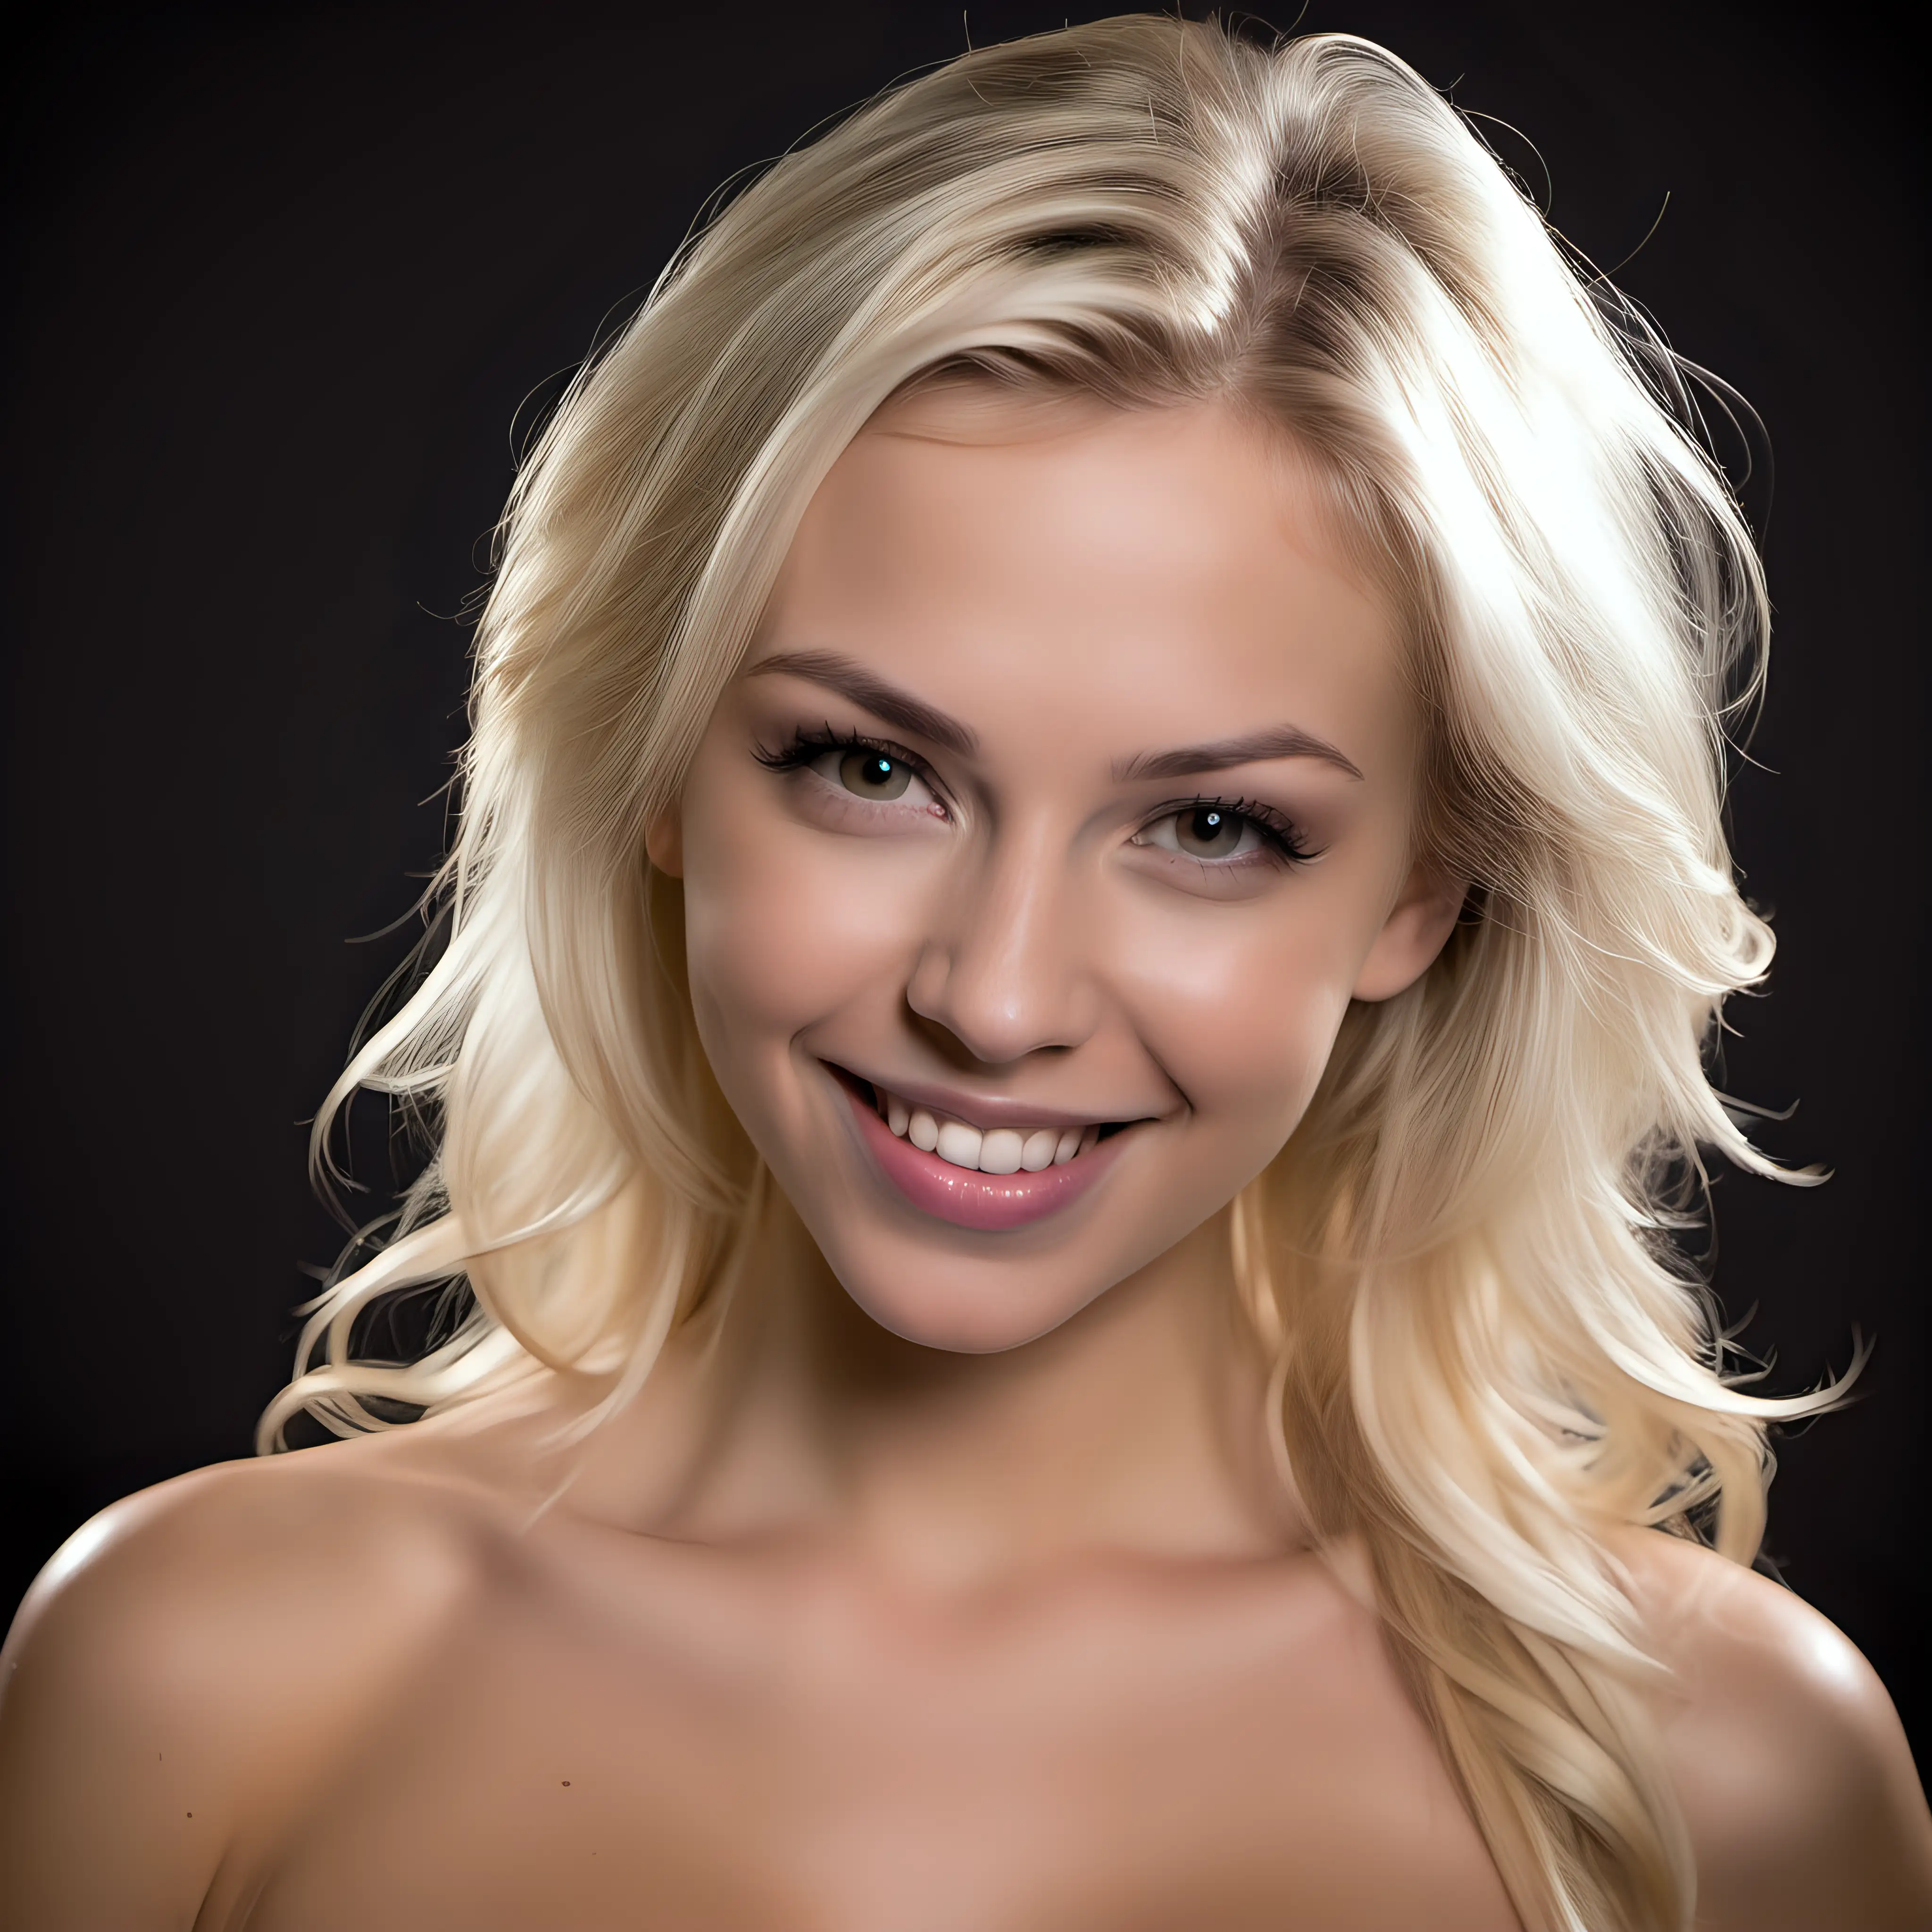 headshot of a sexy blonde model with a naughty smile in a sexy dress